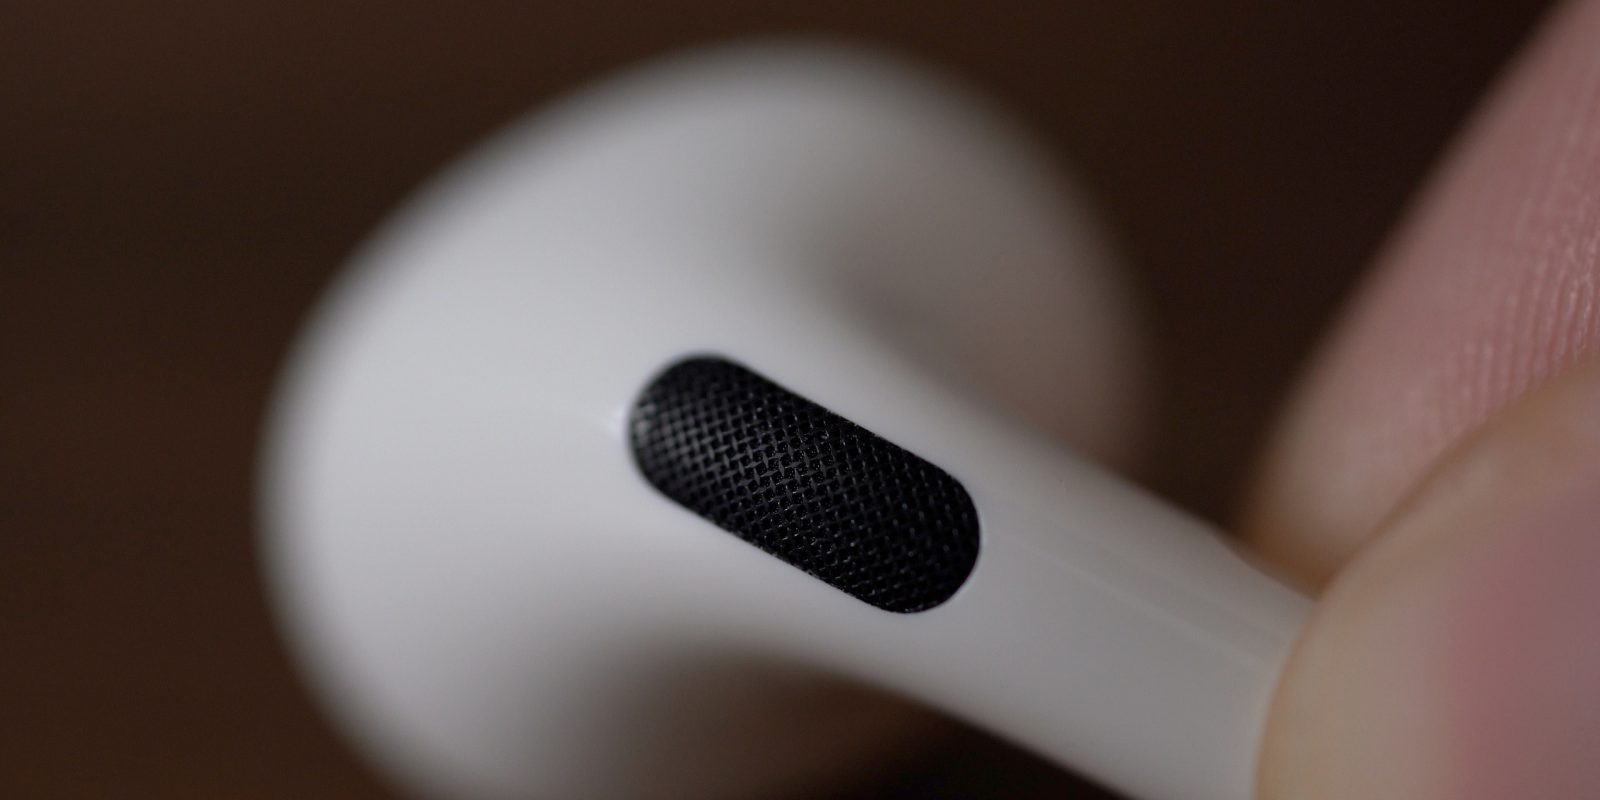 AirPods 4, AirPods Pro 2, and AirPods Max 2: Here are the latest rumors on when to expect them